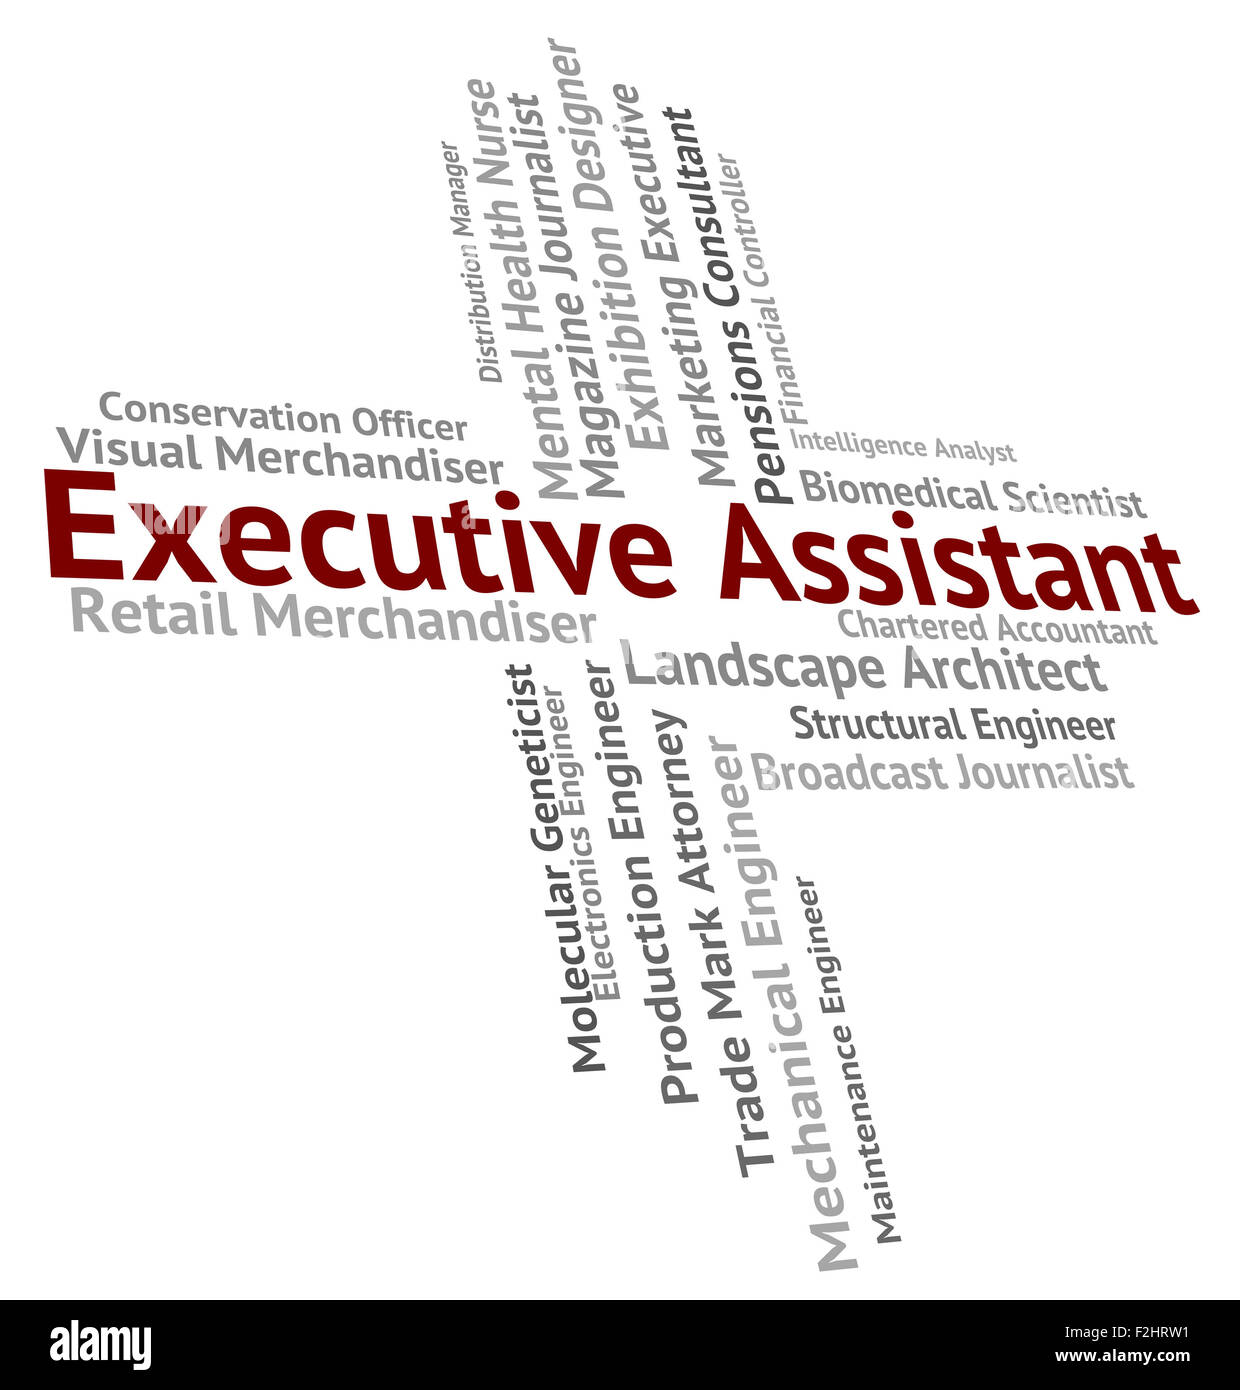 Executive Assistant Meaning Senior Manager And Principal Stock Photo